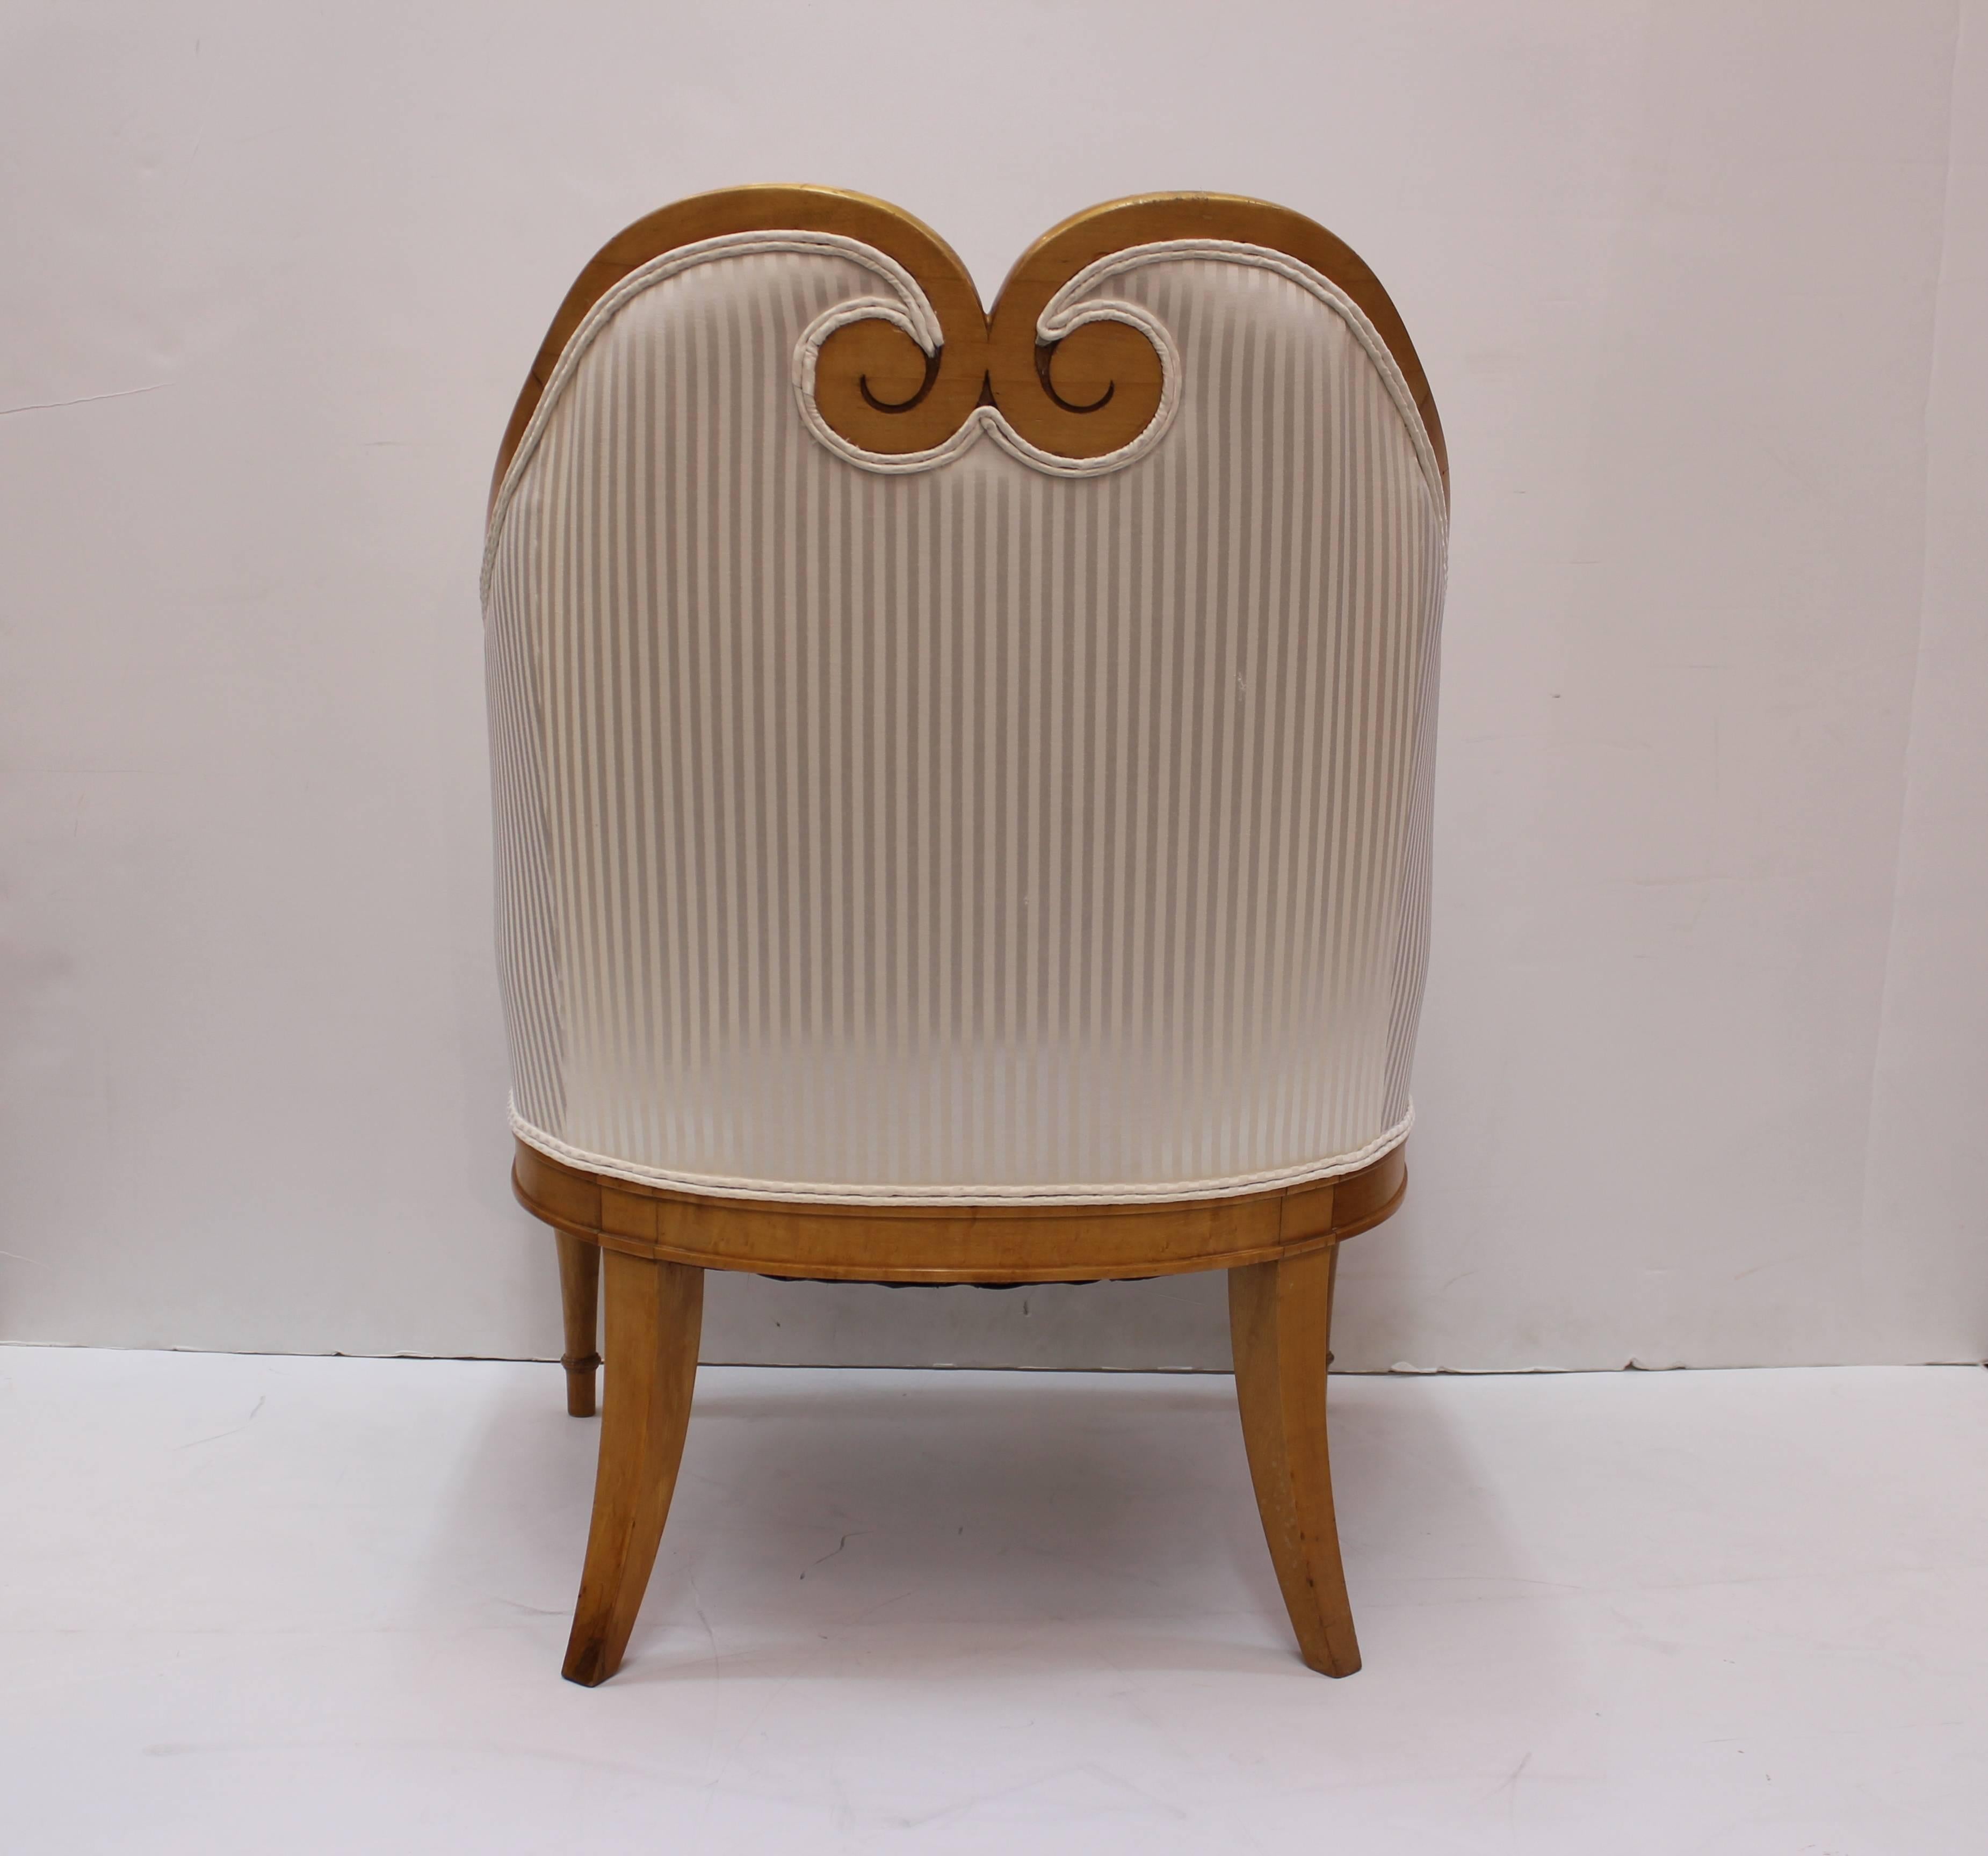 19th Century Biedermeier Occasional Chairs with White Stripe Upholstery